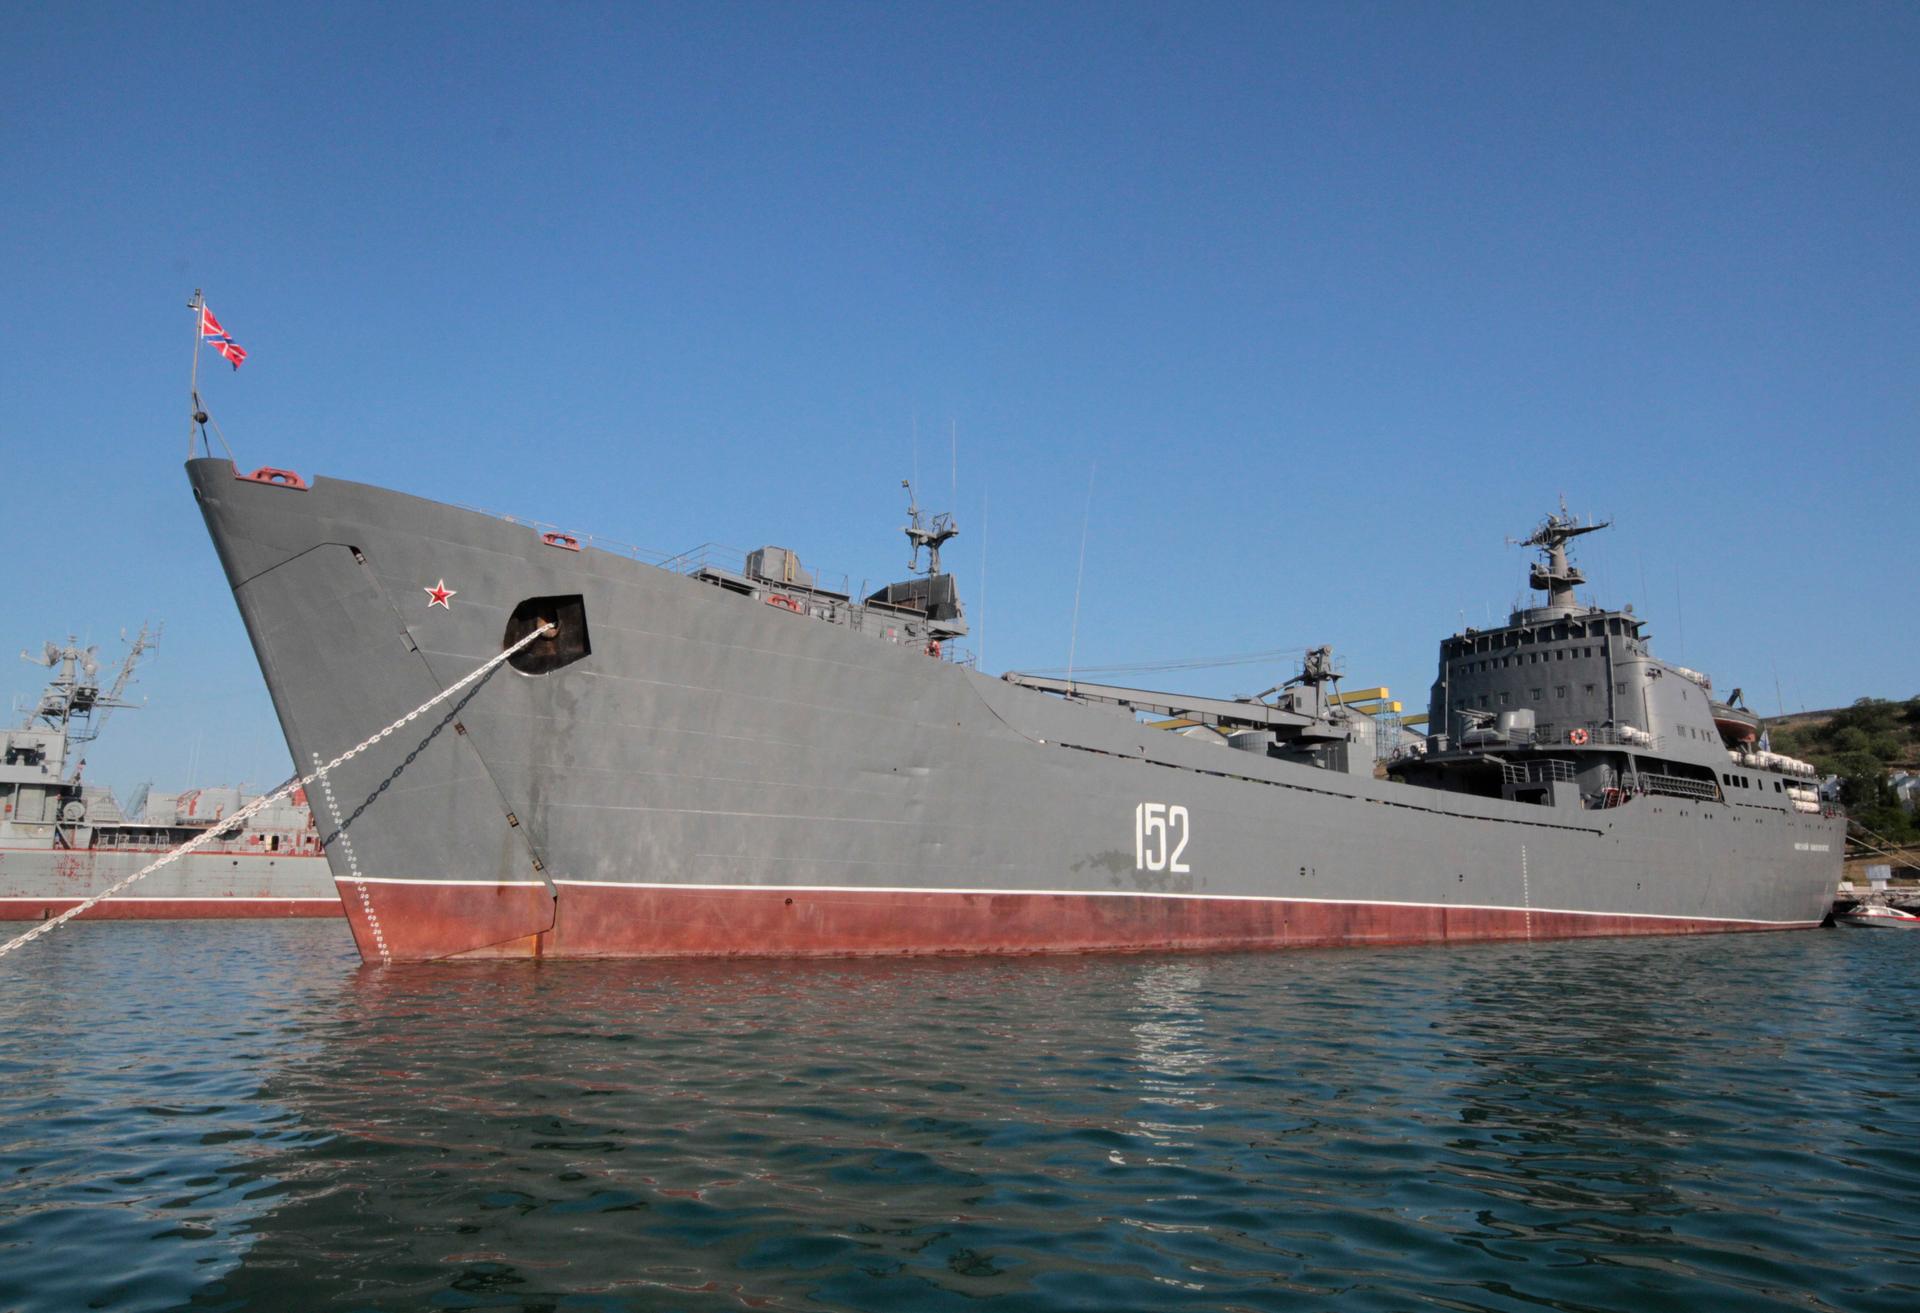 Russian Navy amphibious landing vessel "Nikolai Filchenkov" is docked at the Ukrainian Black Sea port of Sevastopol, June 19, 2012. The vessel is in the state of instant readiness for departure on a mission to the Syrian port of Tartus.